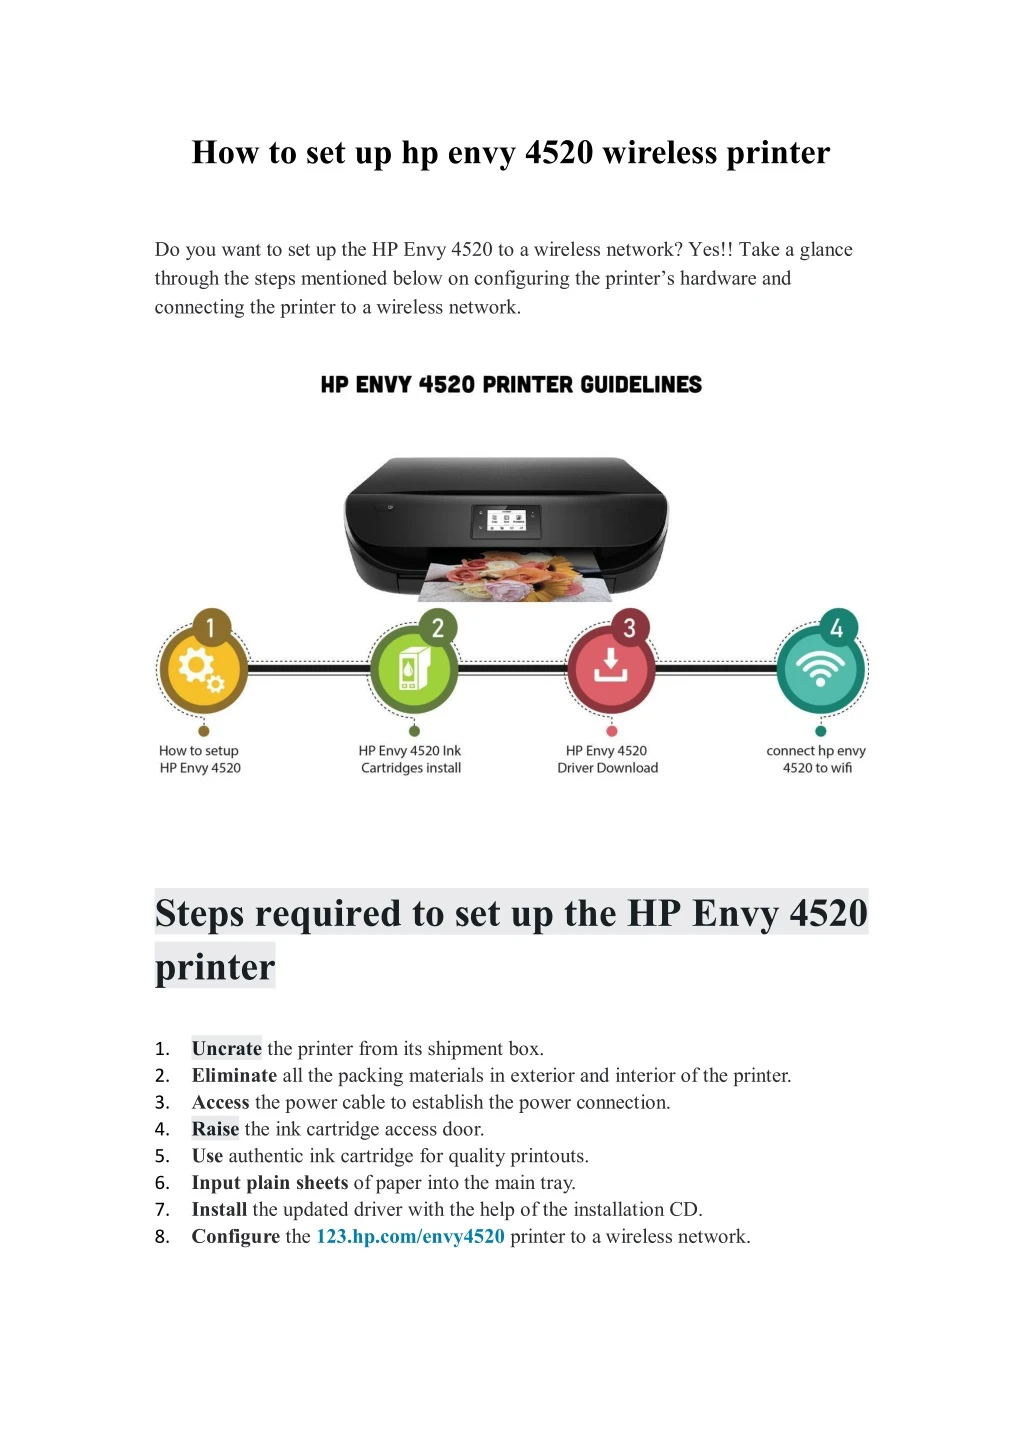 Ppt How To Setup Hp Envy 4520 Wireless Printer Solutions Powerpoint Presentation Id8163693 5284